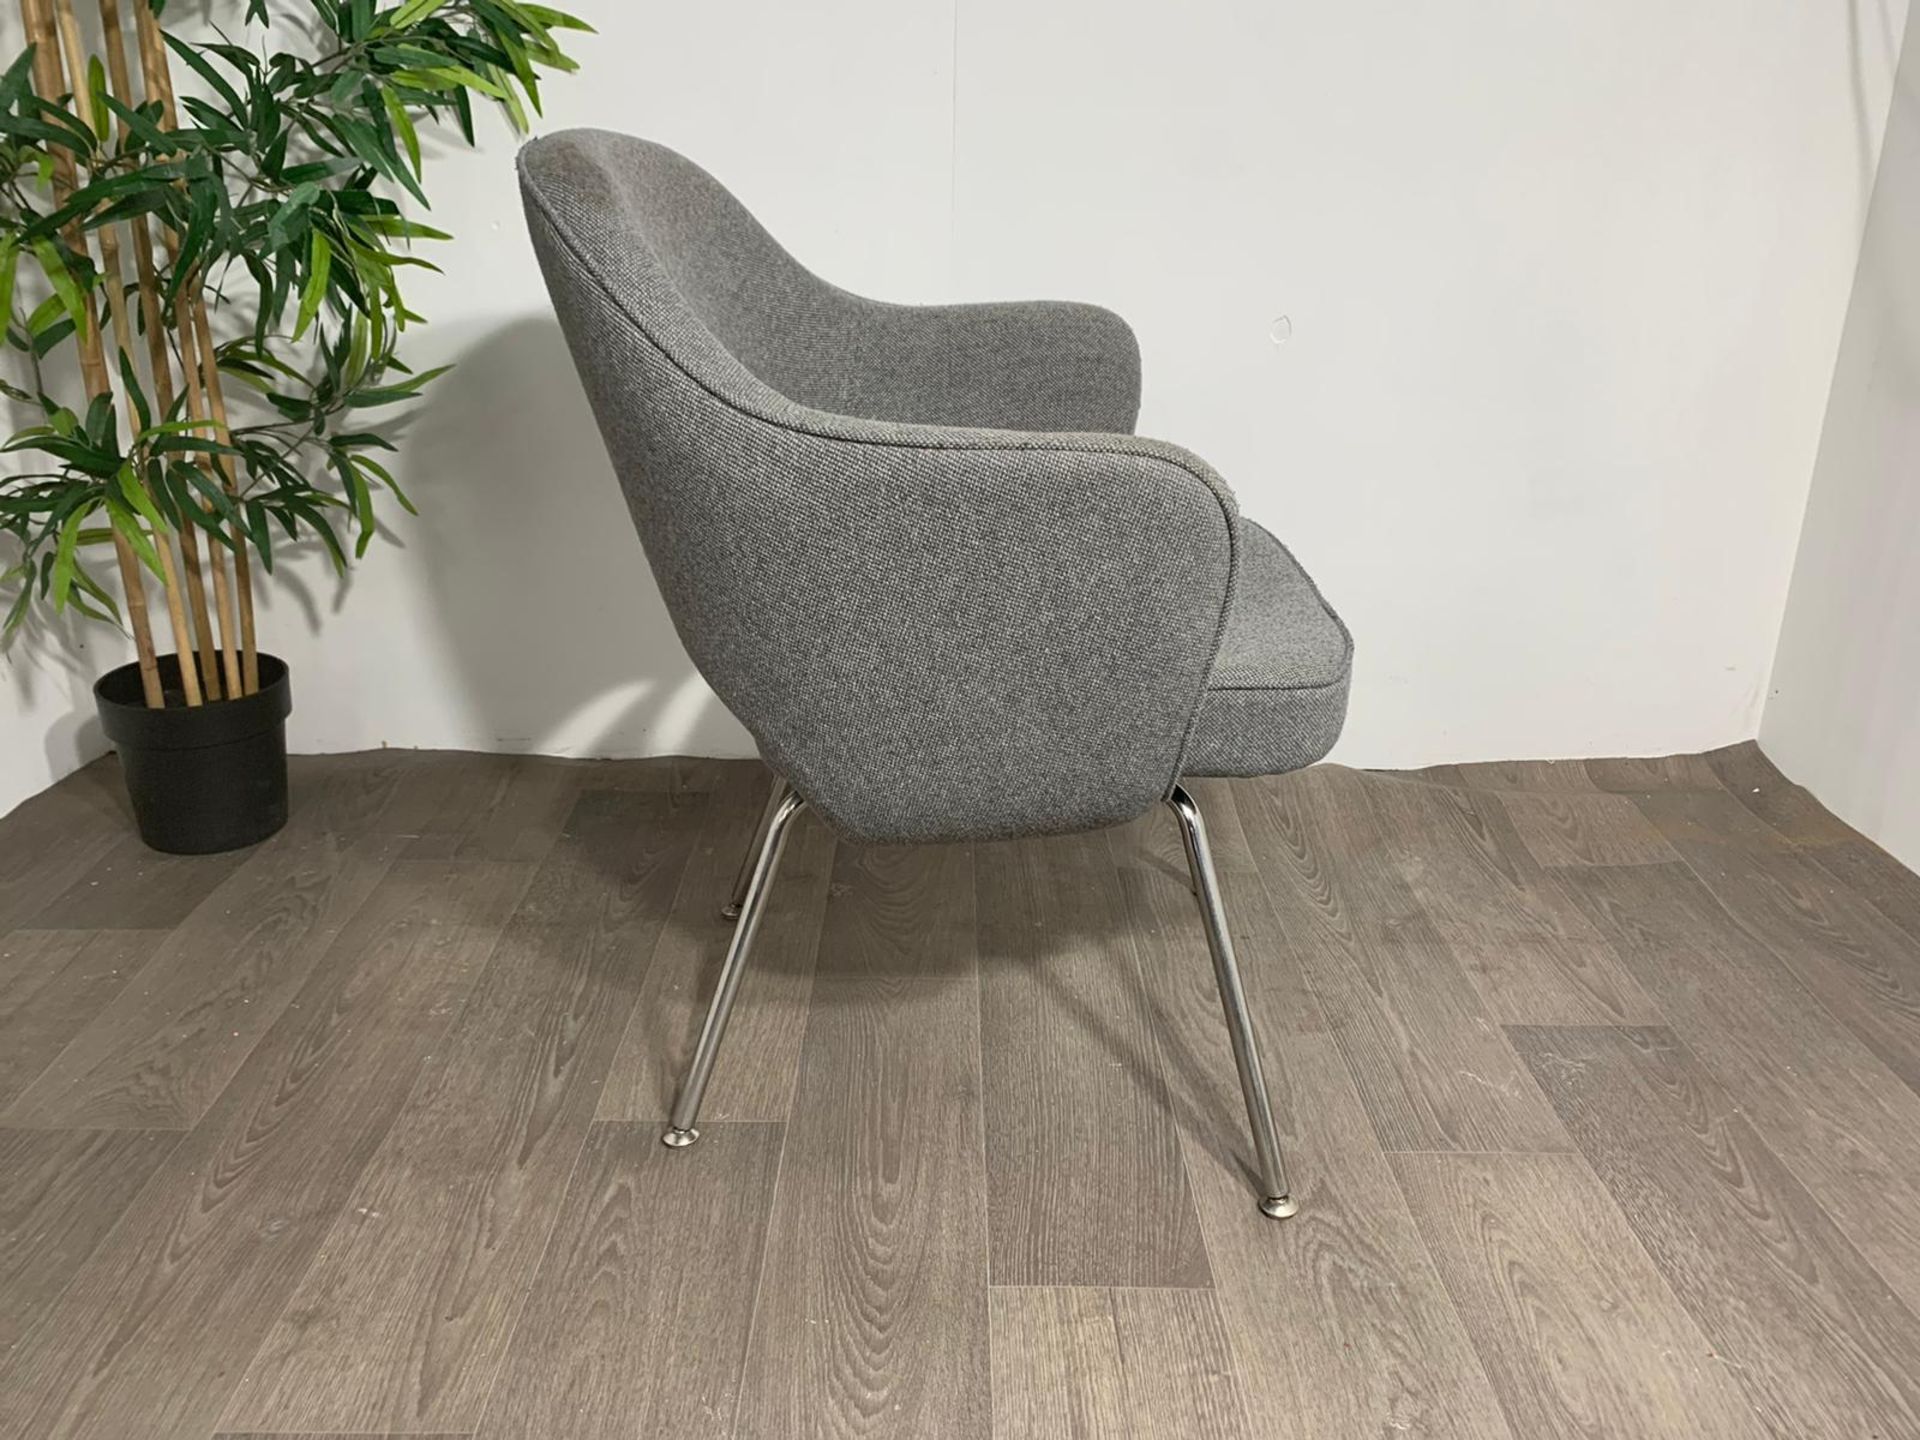 Grey Fabric Commercial Grade Chair with Chrome Legs x2 - Image 5 of 8